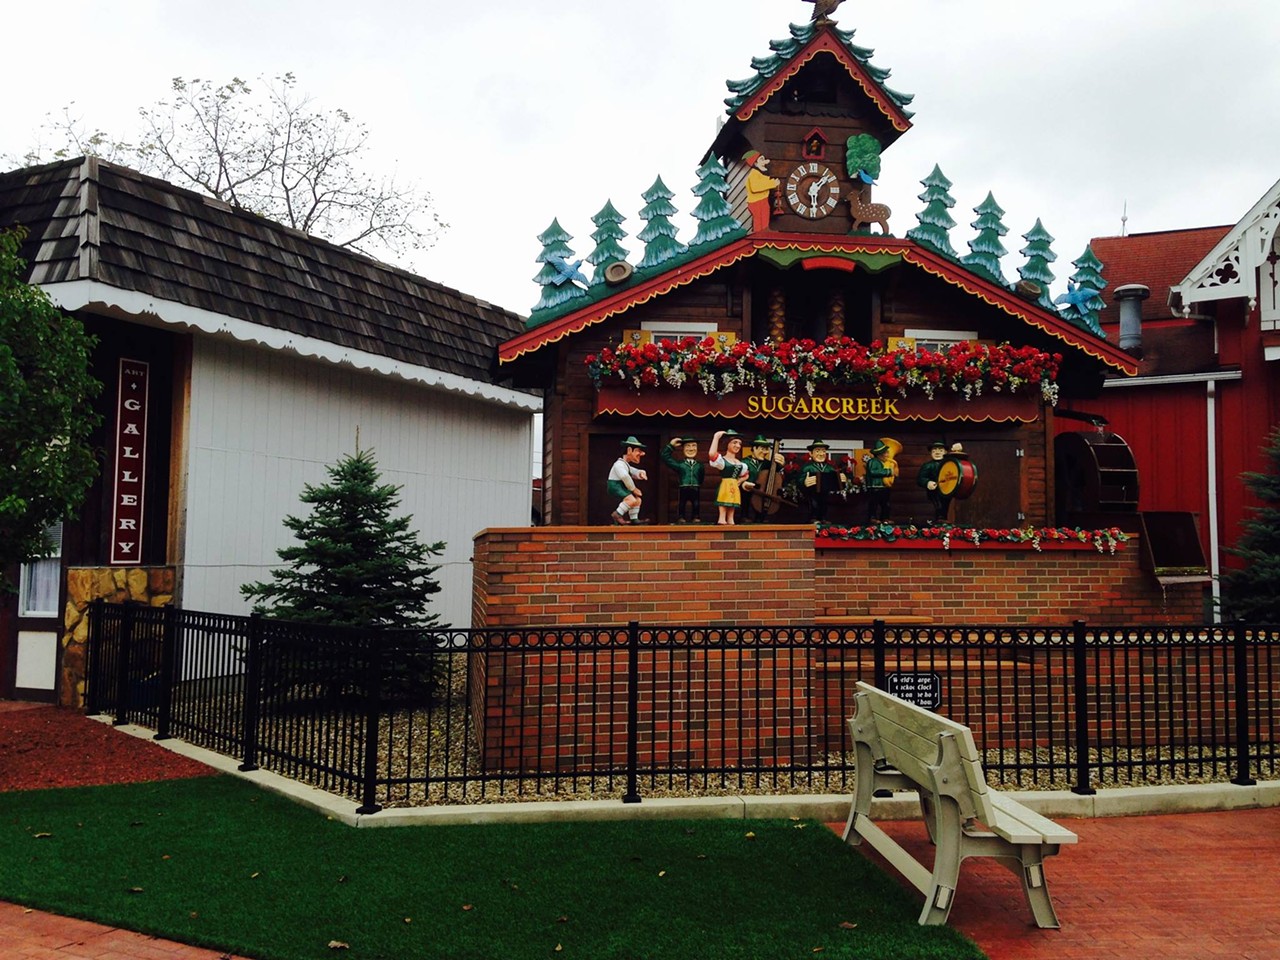  World’s Largest Cuckoo Clock
100 North Broadway St., Sugarcreek 
In 2010, this 24-foot cuckoo clock was moved from its old home, Wilmot, to Sugarcreek, a Swiss-themed tourist town. Sugarcreek is only about 80 miles south of Cleveland, so what are you waiting for, the clock is ticking (get it?).